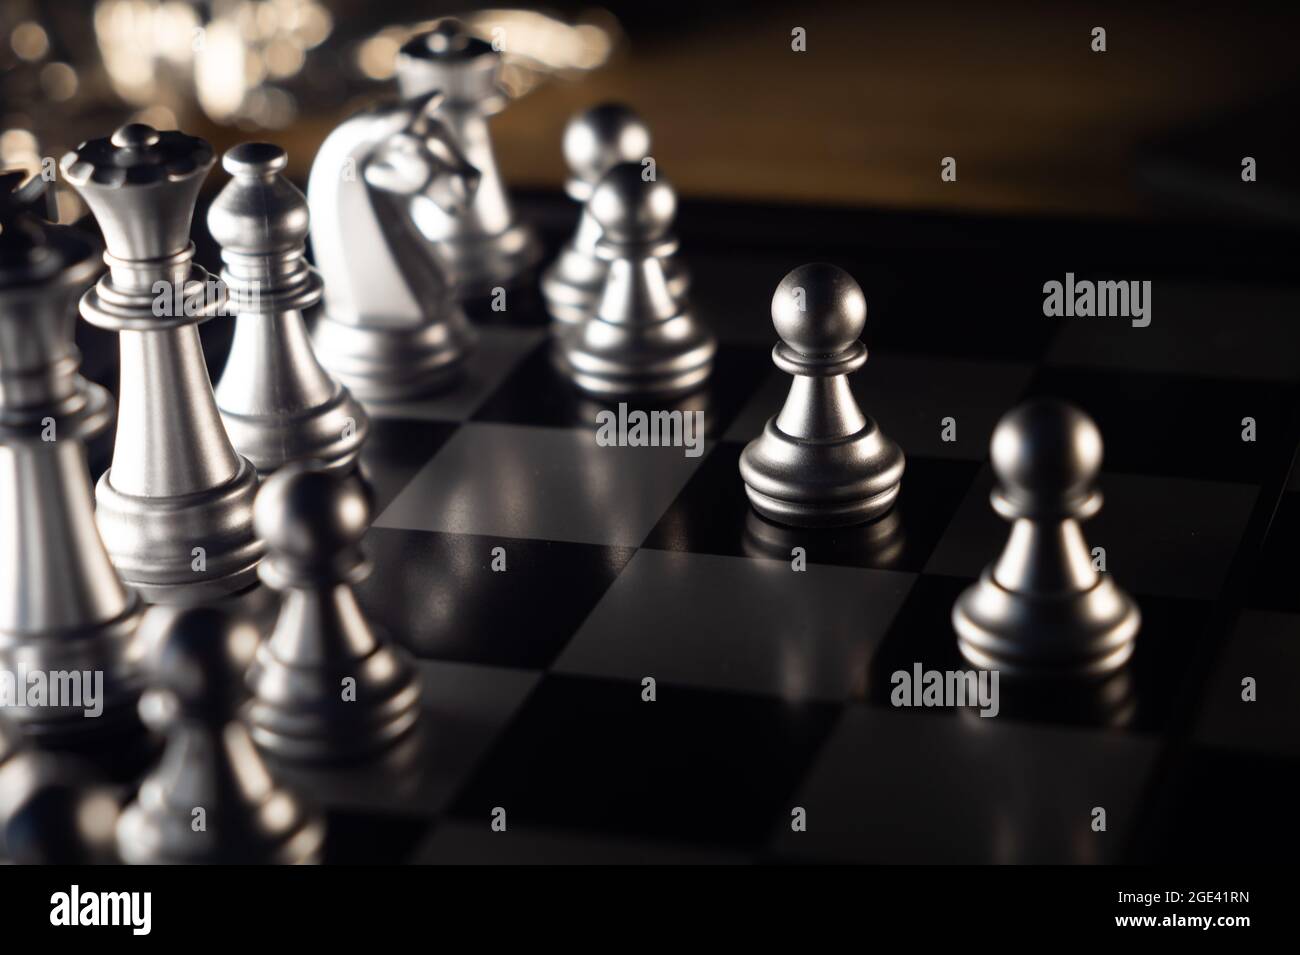 View at the chessboard with white chess figures in the focus Stock Photo